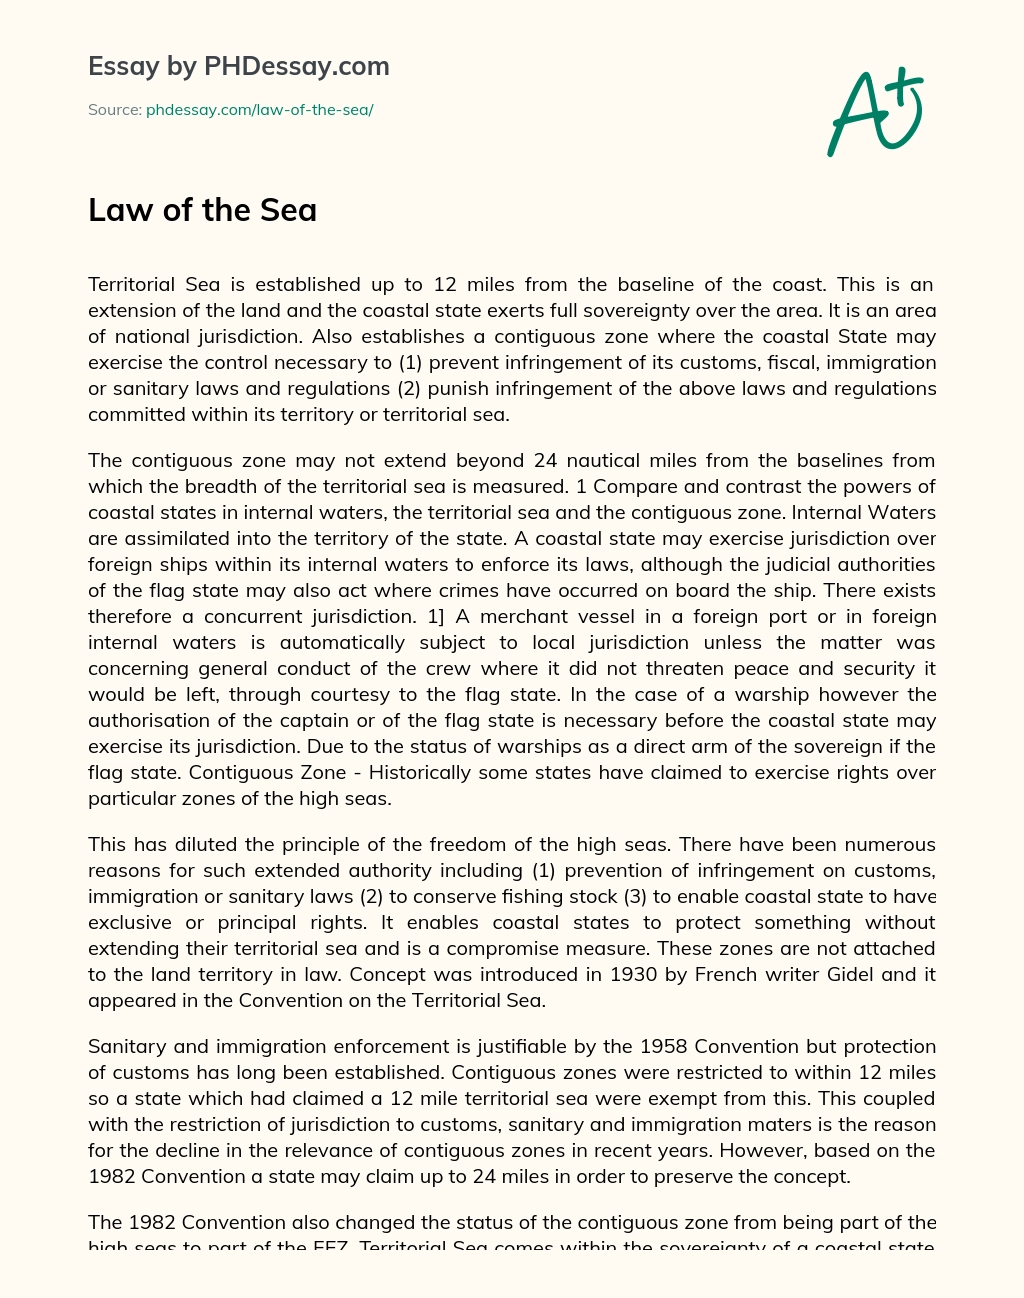 Law of the Sea essay